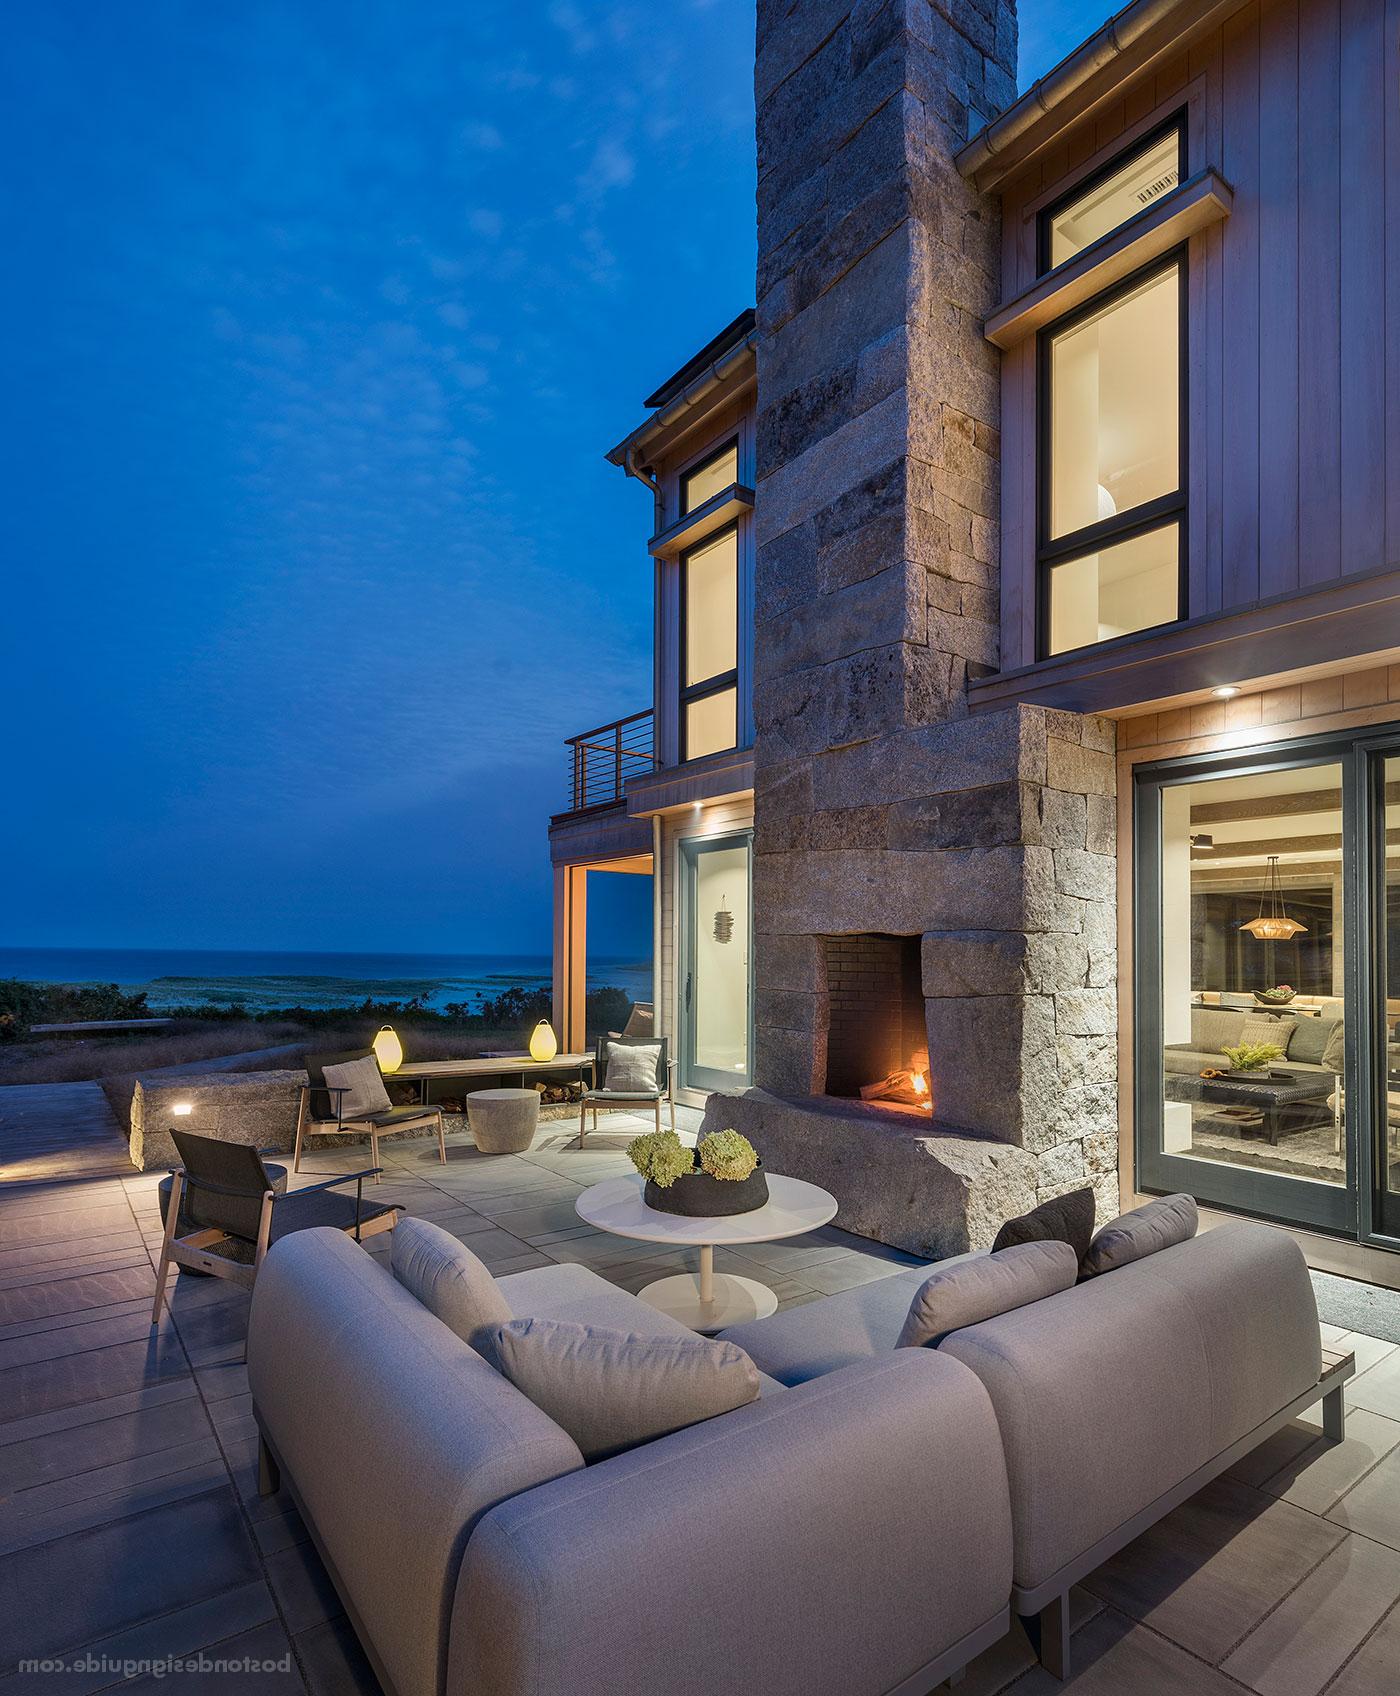 Organic beachside terrace with fireplace, designed by SiteCreative landscape architects